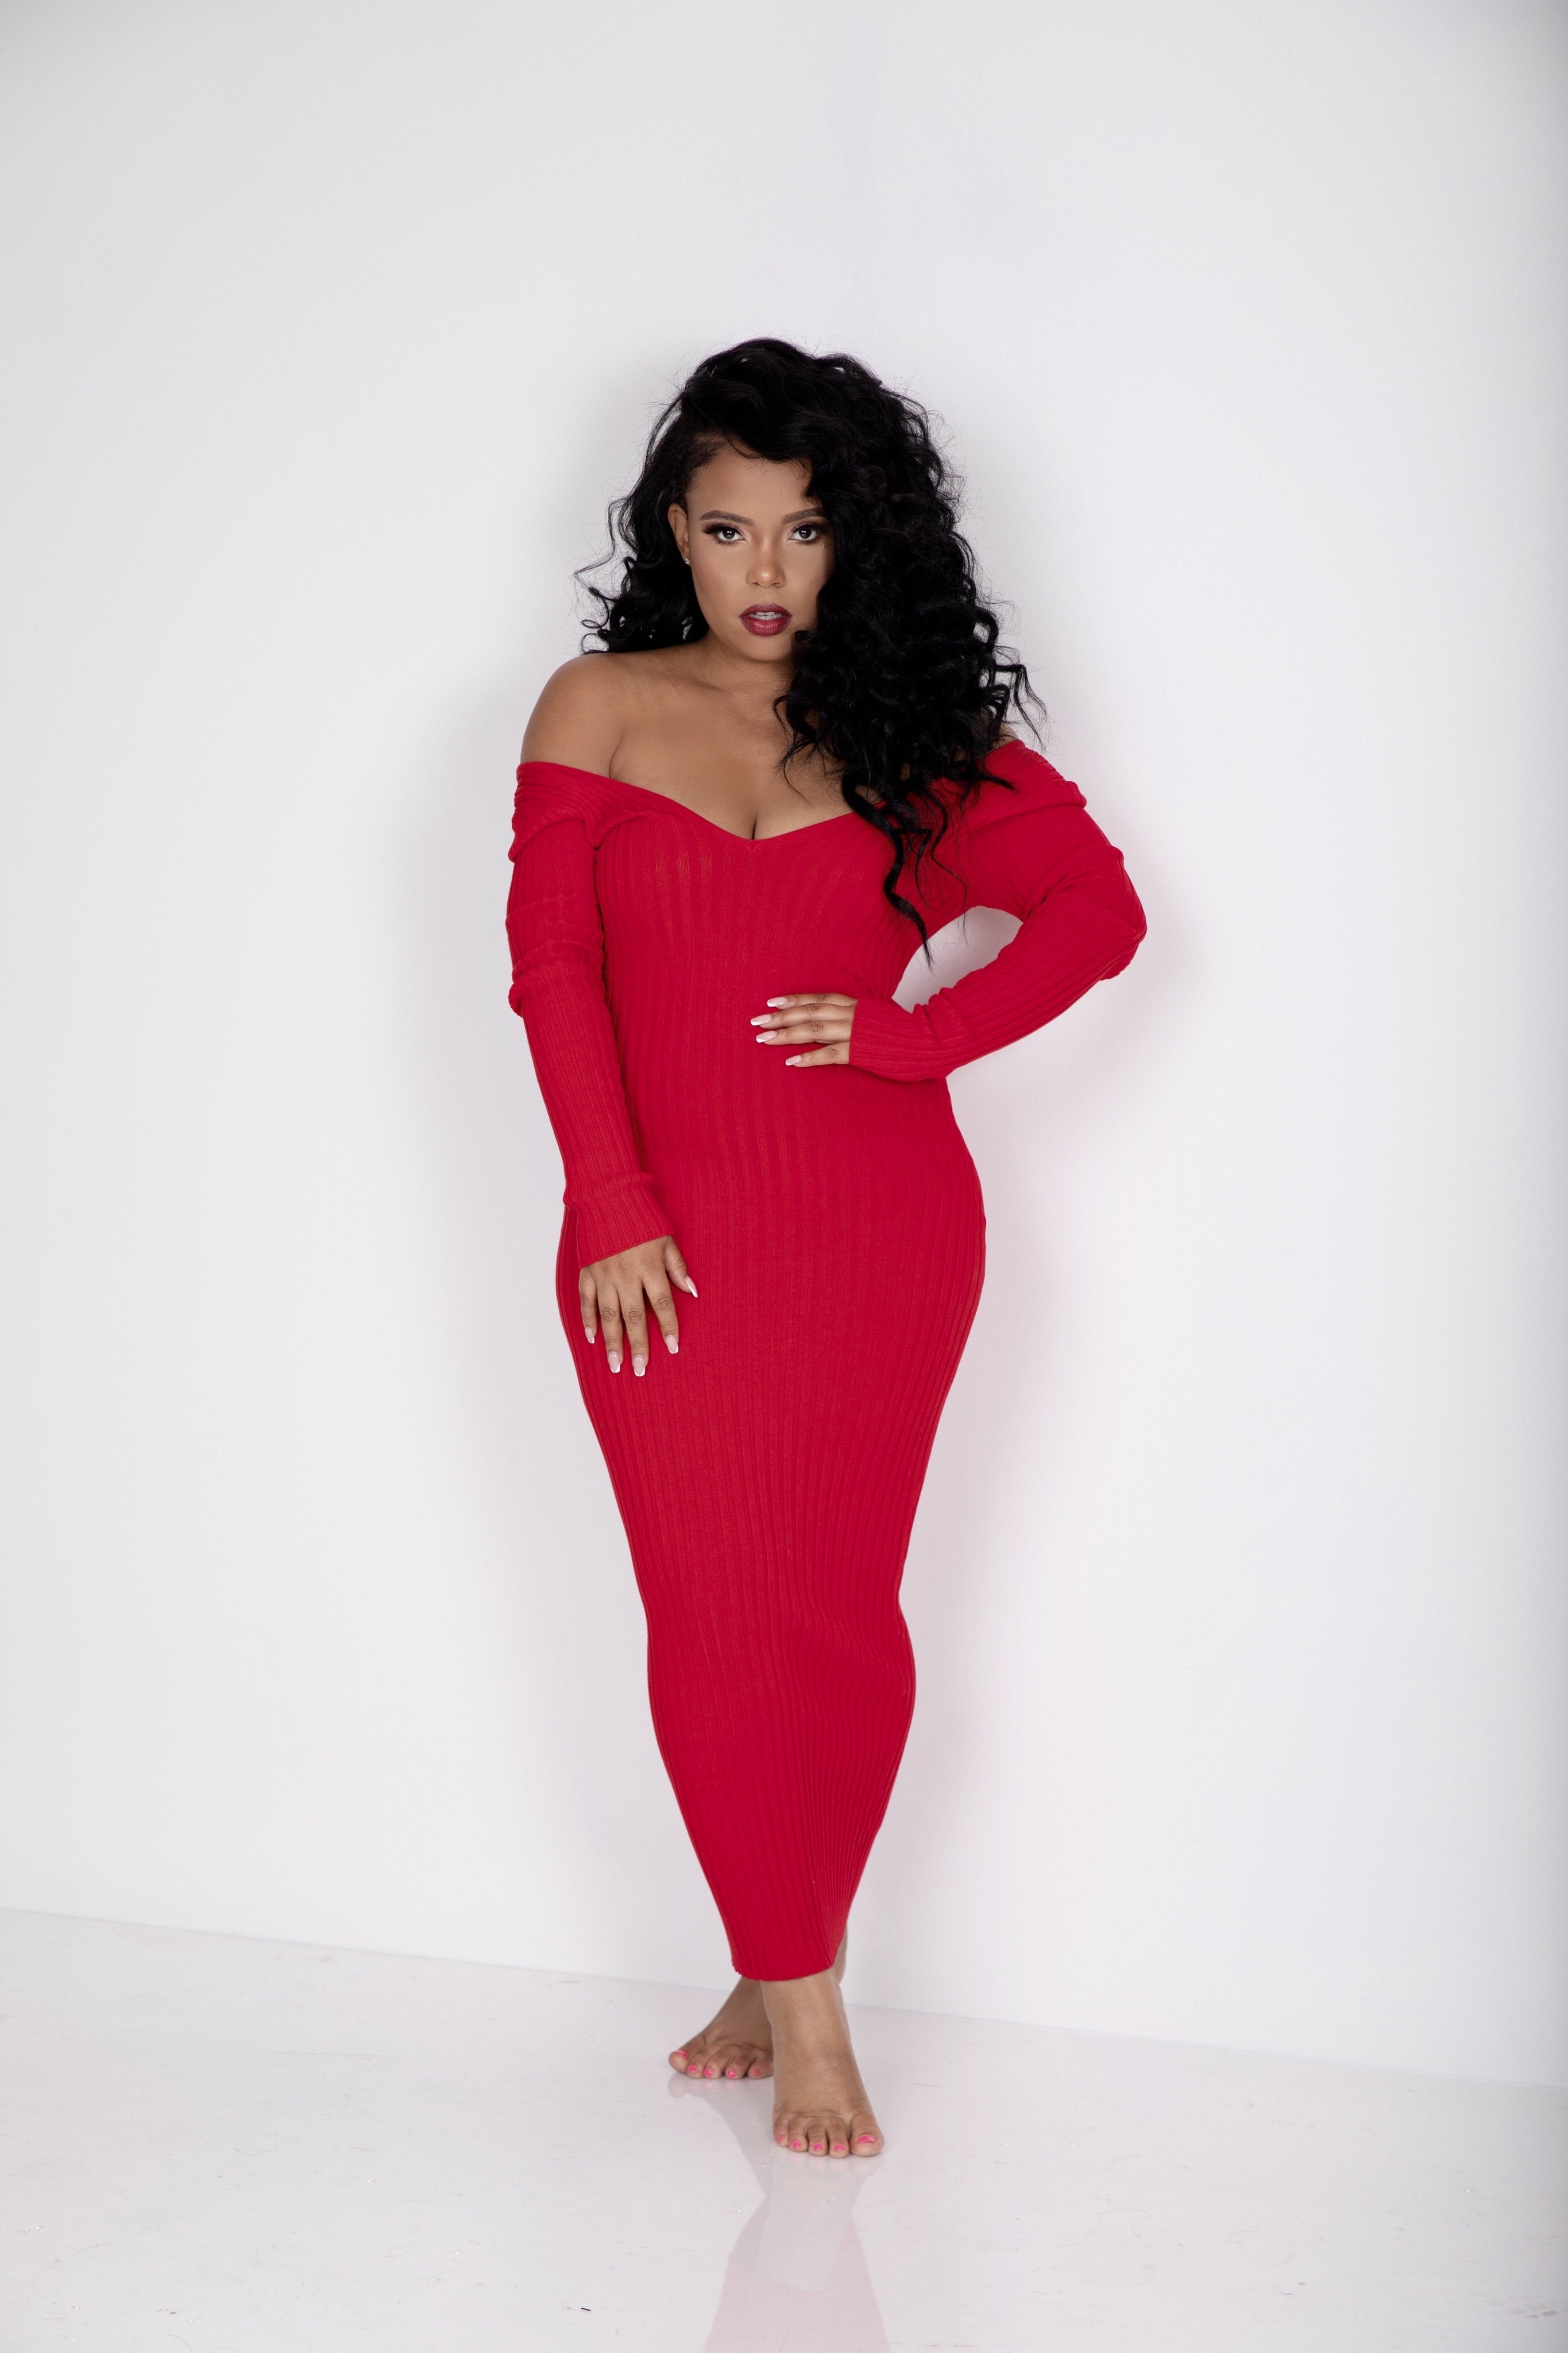 ESSENCE Vendor Spotlight: 12 Fab Holiday Finds From Nichole Lynel’s Latest Collections